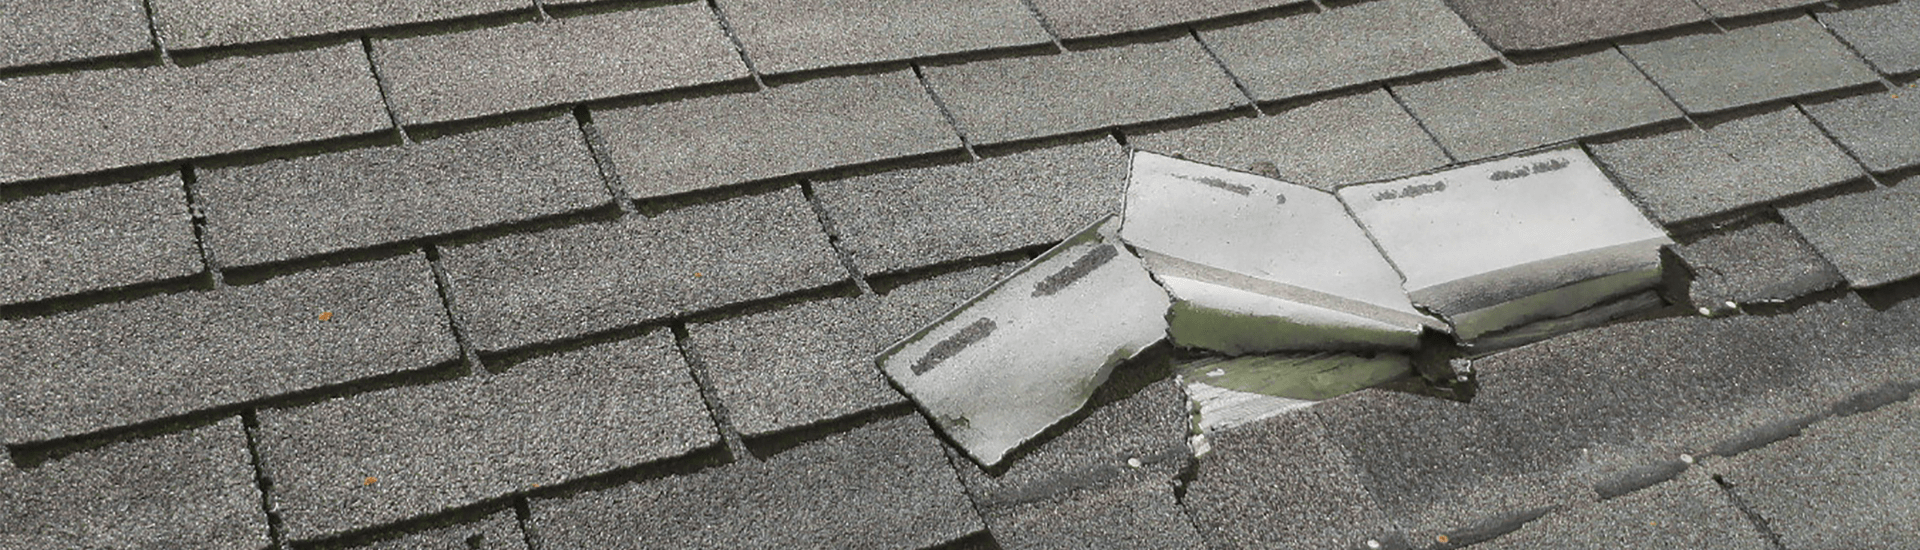 WHAT DOES HAIL DAMAGE LOOK LIKE ON A ROOF